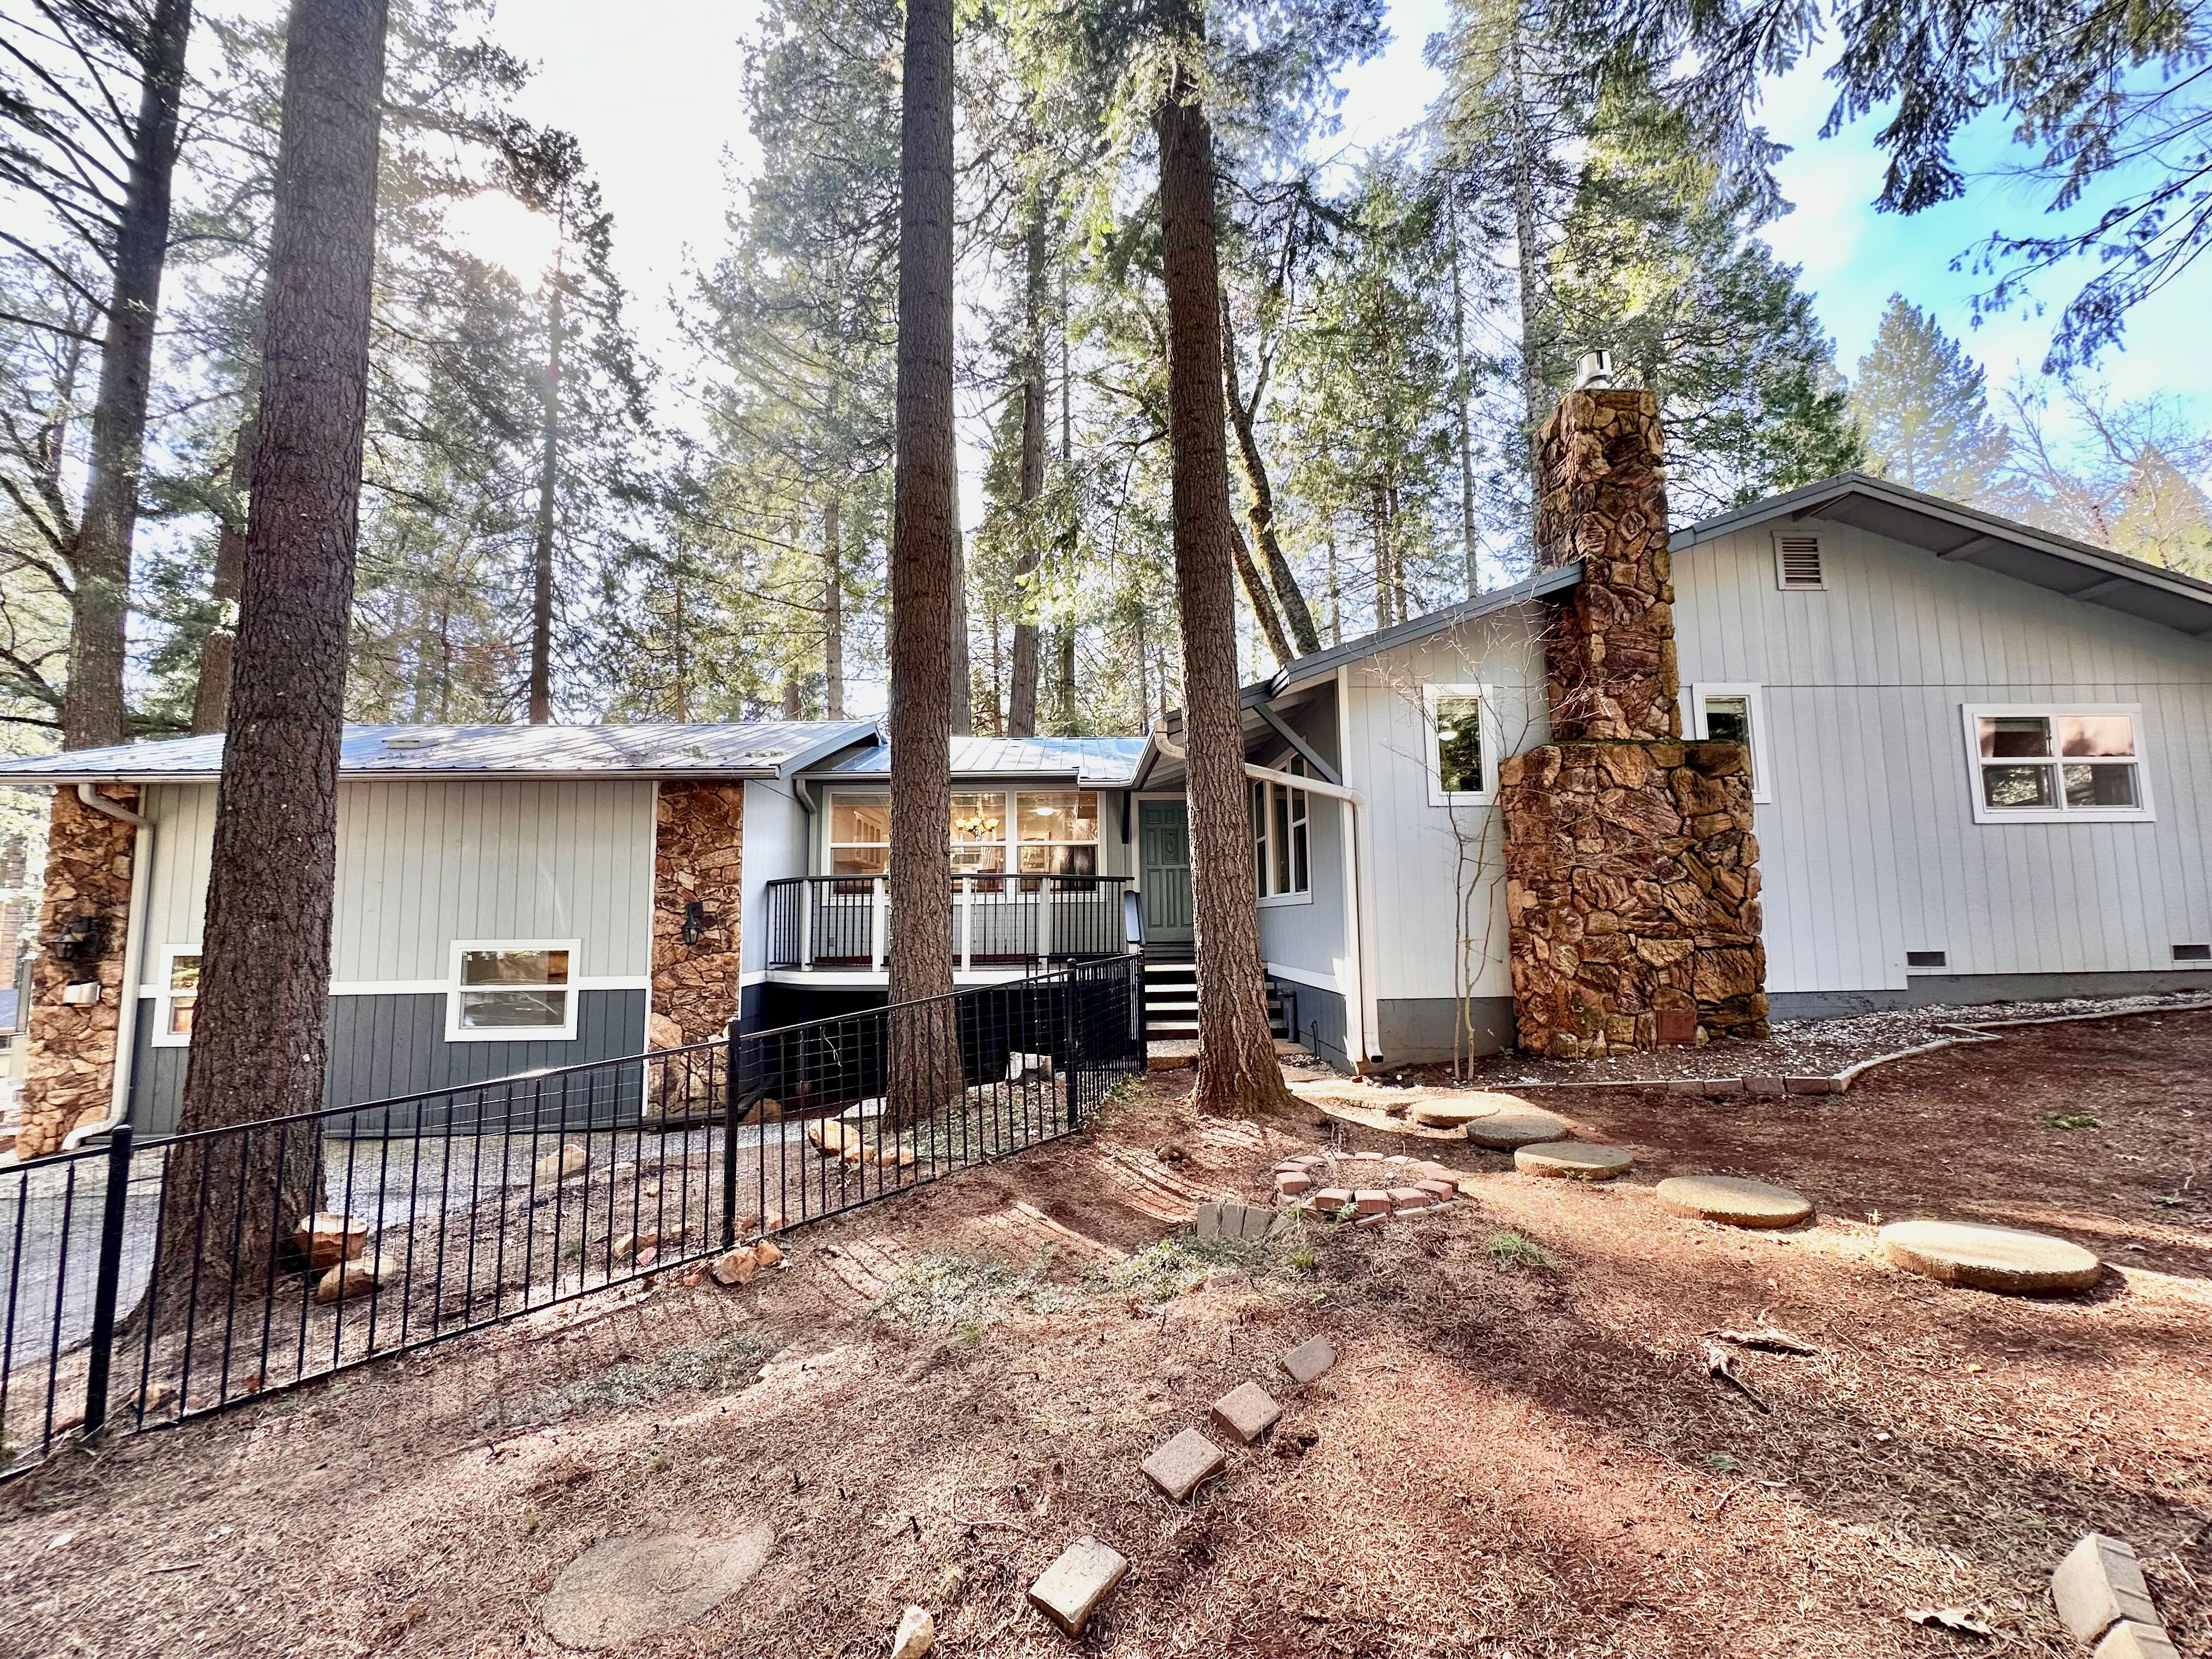 FOR RENT: 13590 Red Dog Rd, Unit A, Nevada City